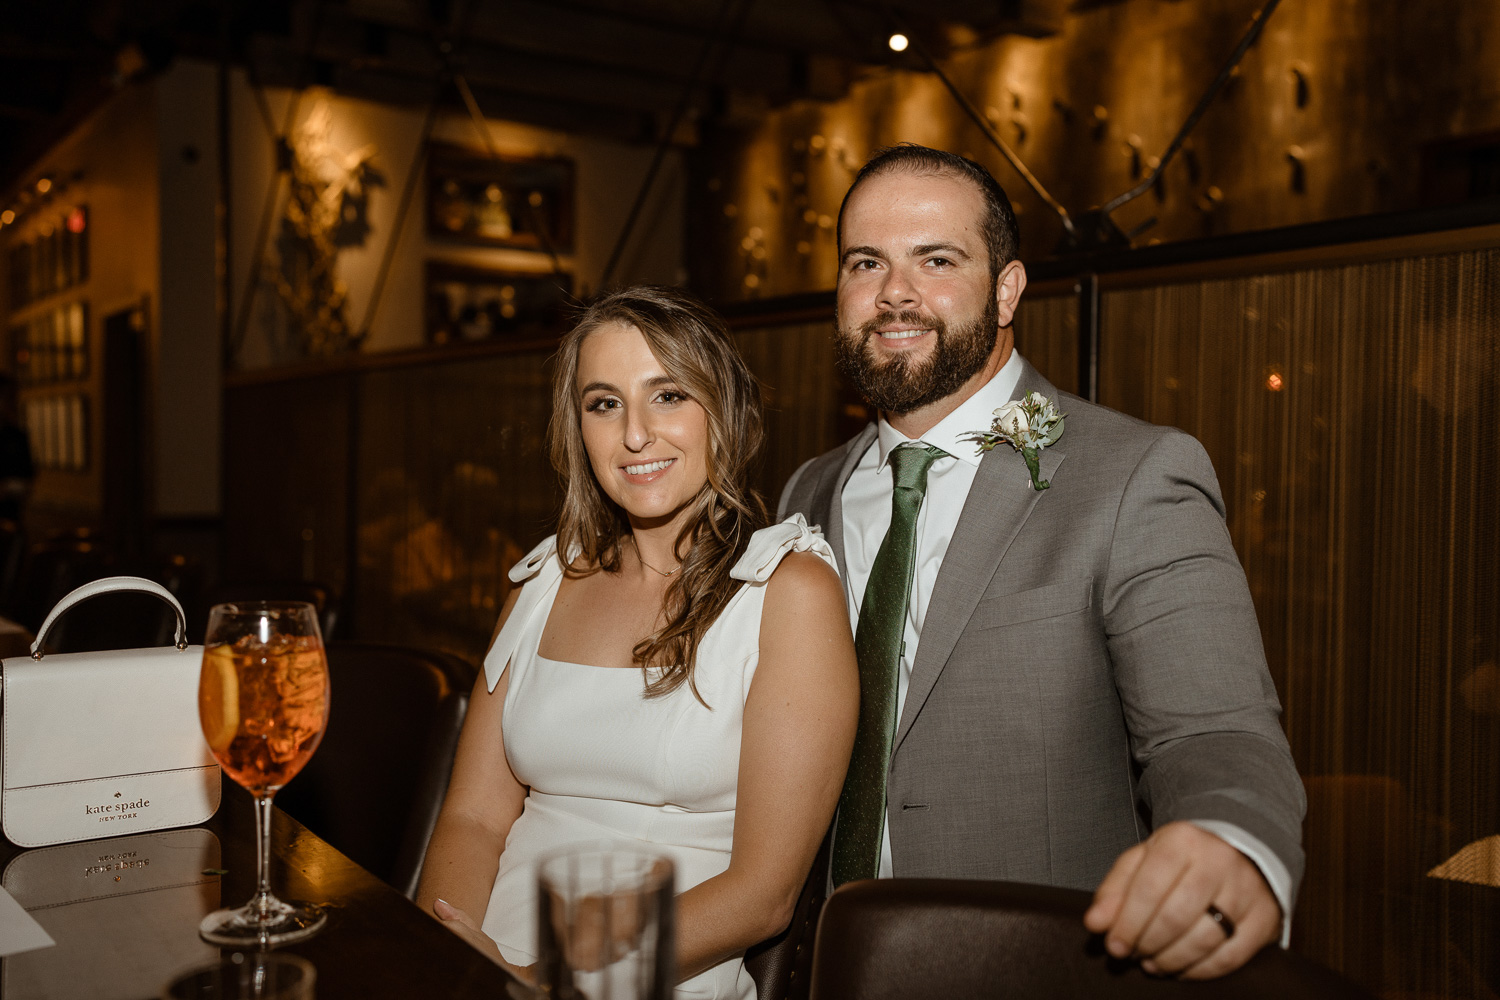 Bride and Groom pose at the bar before their intimate reception dinner at Posana where they celebrate their Asheville elopement